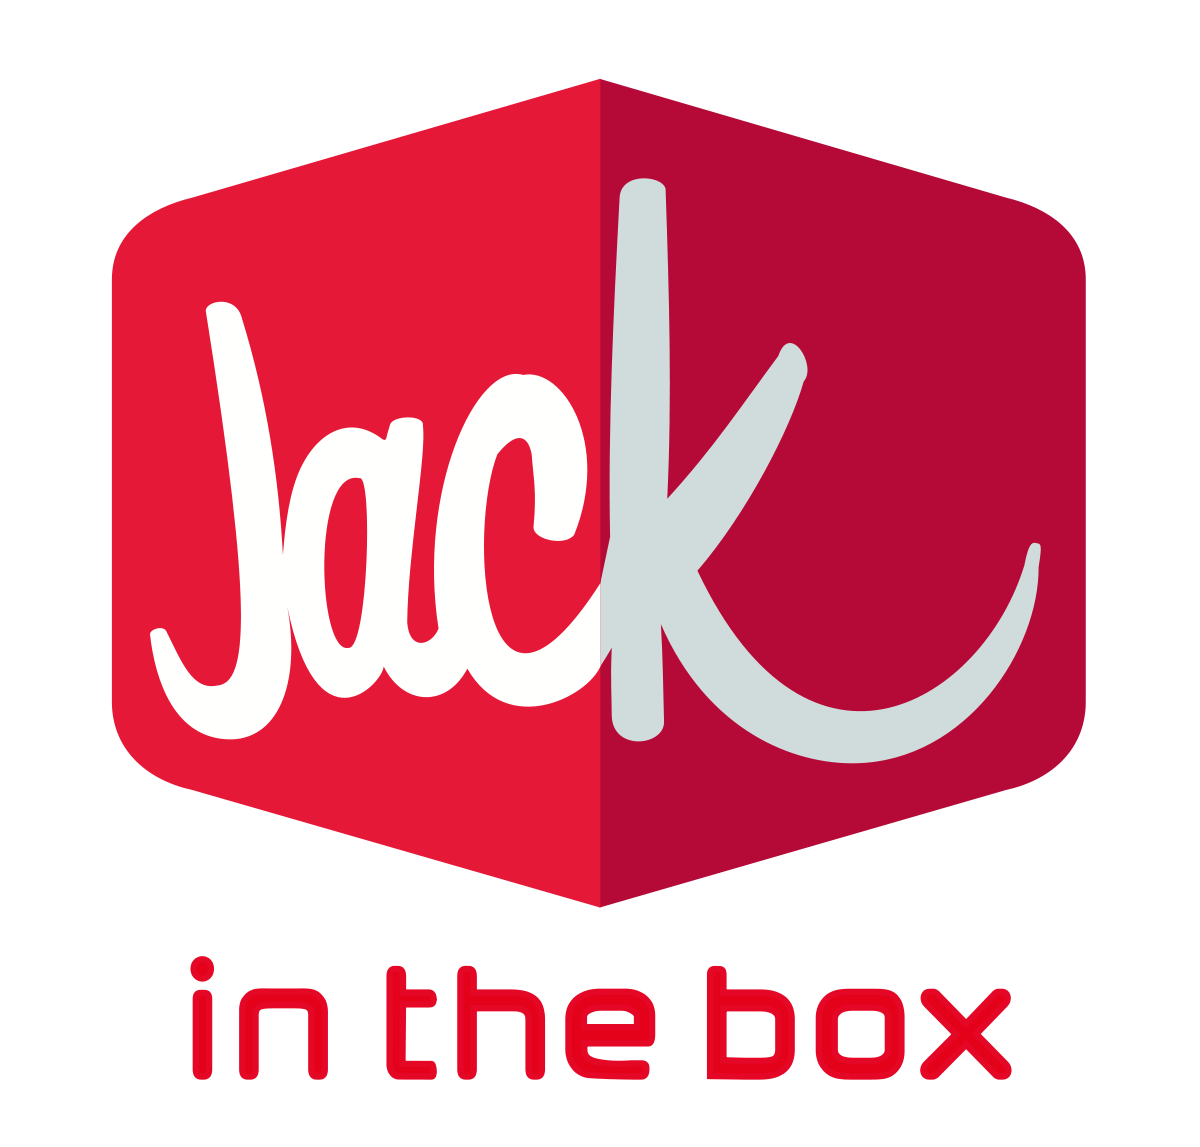 Red White and Open Envelope Logo - Jack in the Box